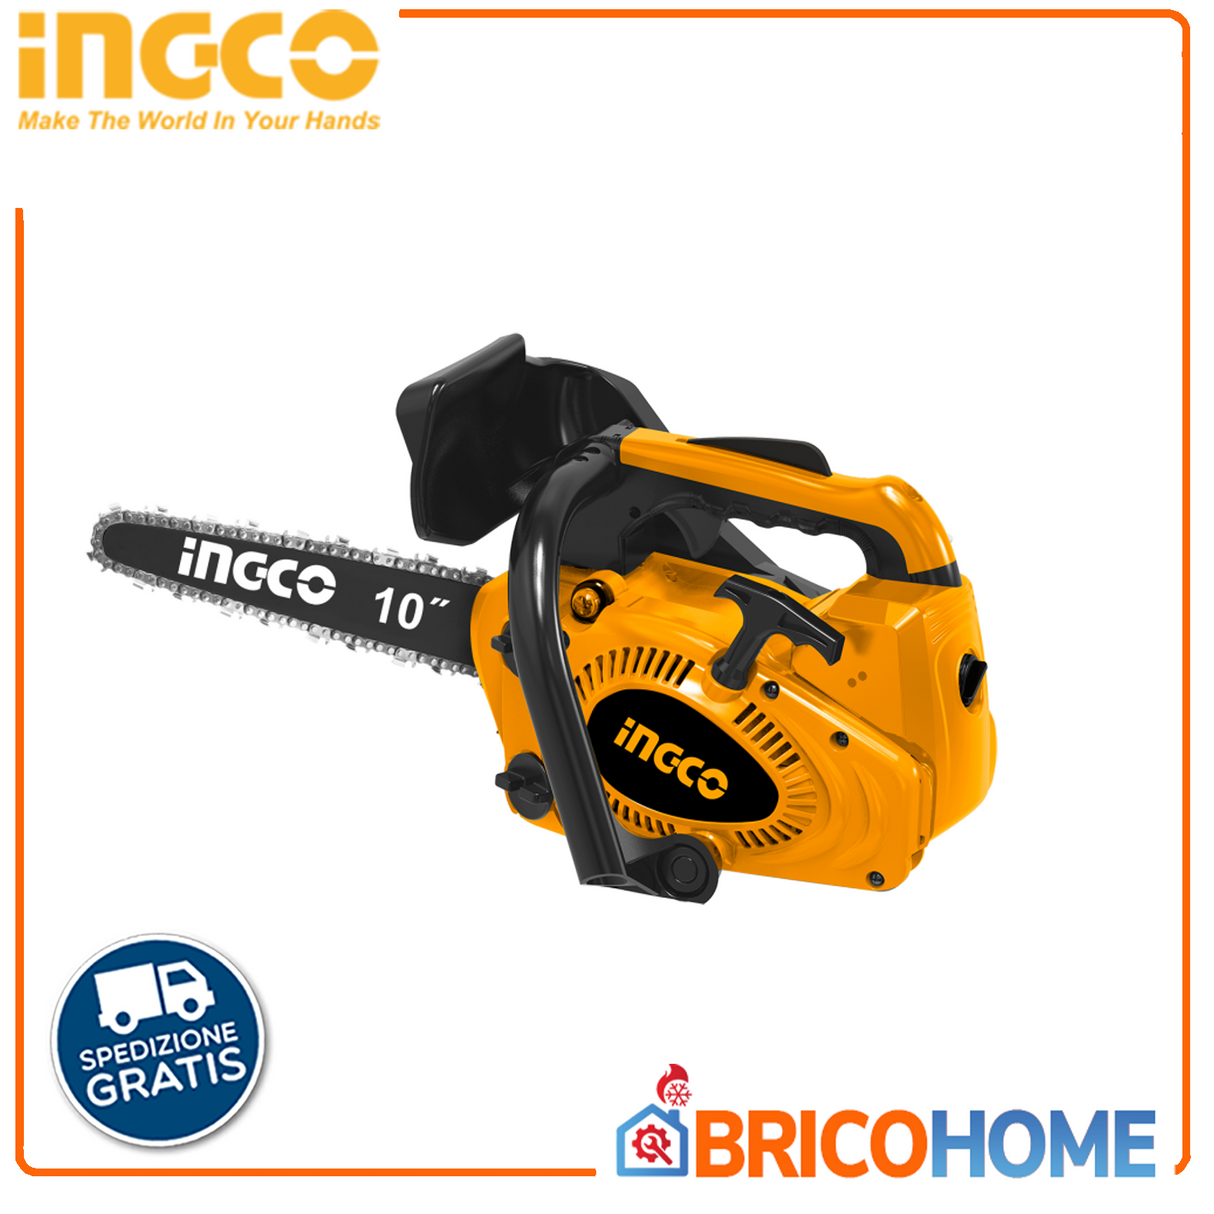 Pruning chainsaw with 1HP INGCO Carving blade